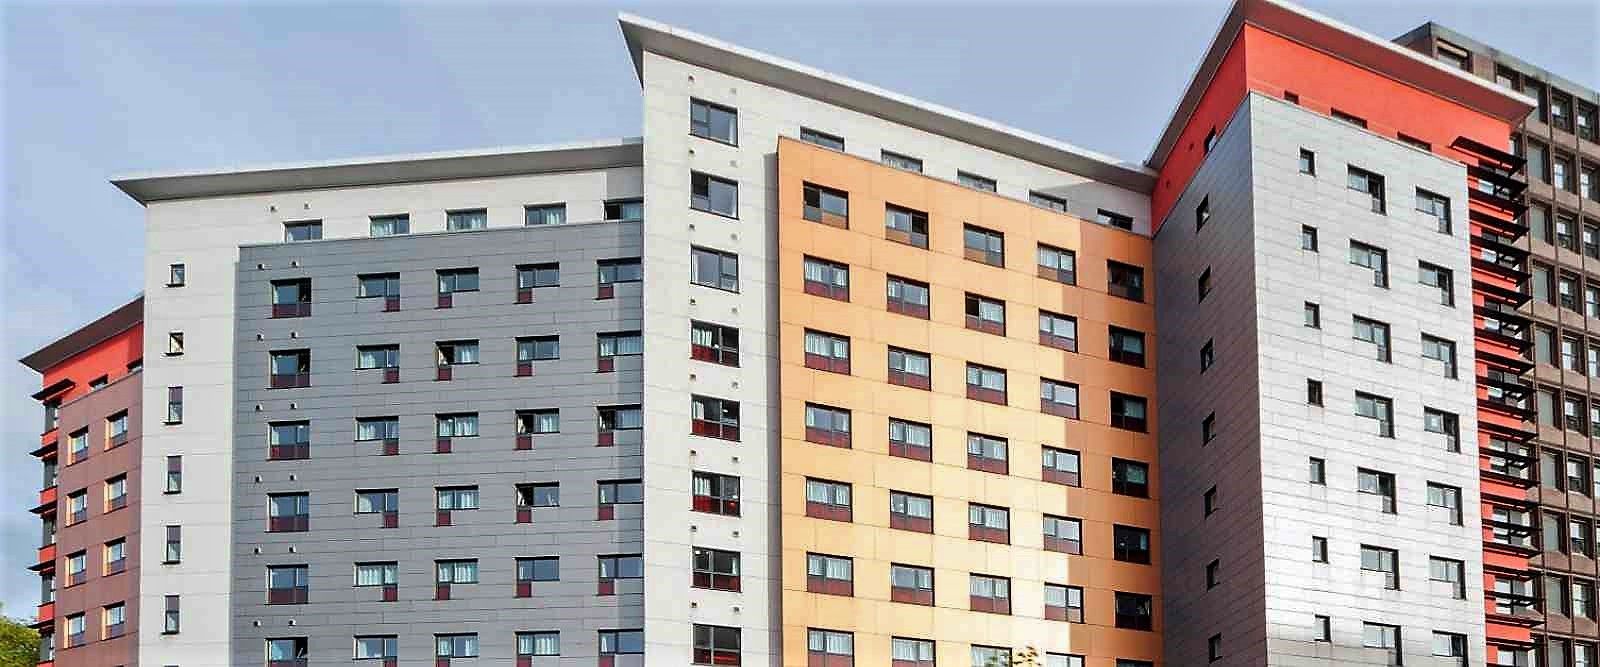 tower office blocks with visoline commercial hinged windows